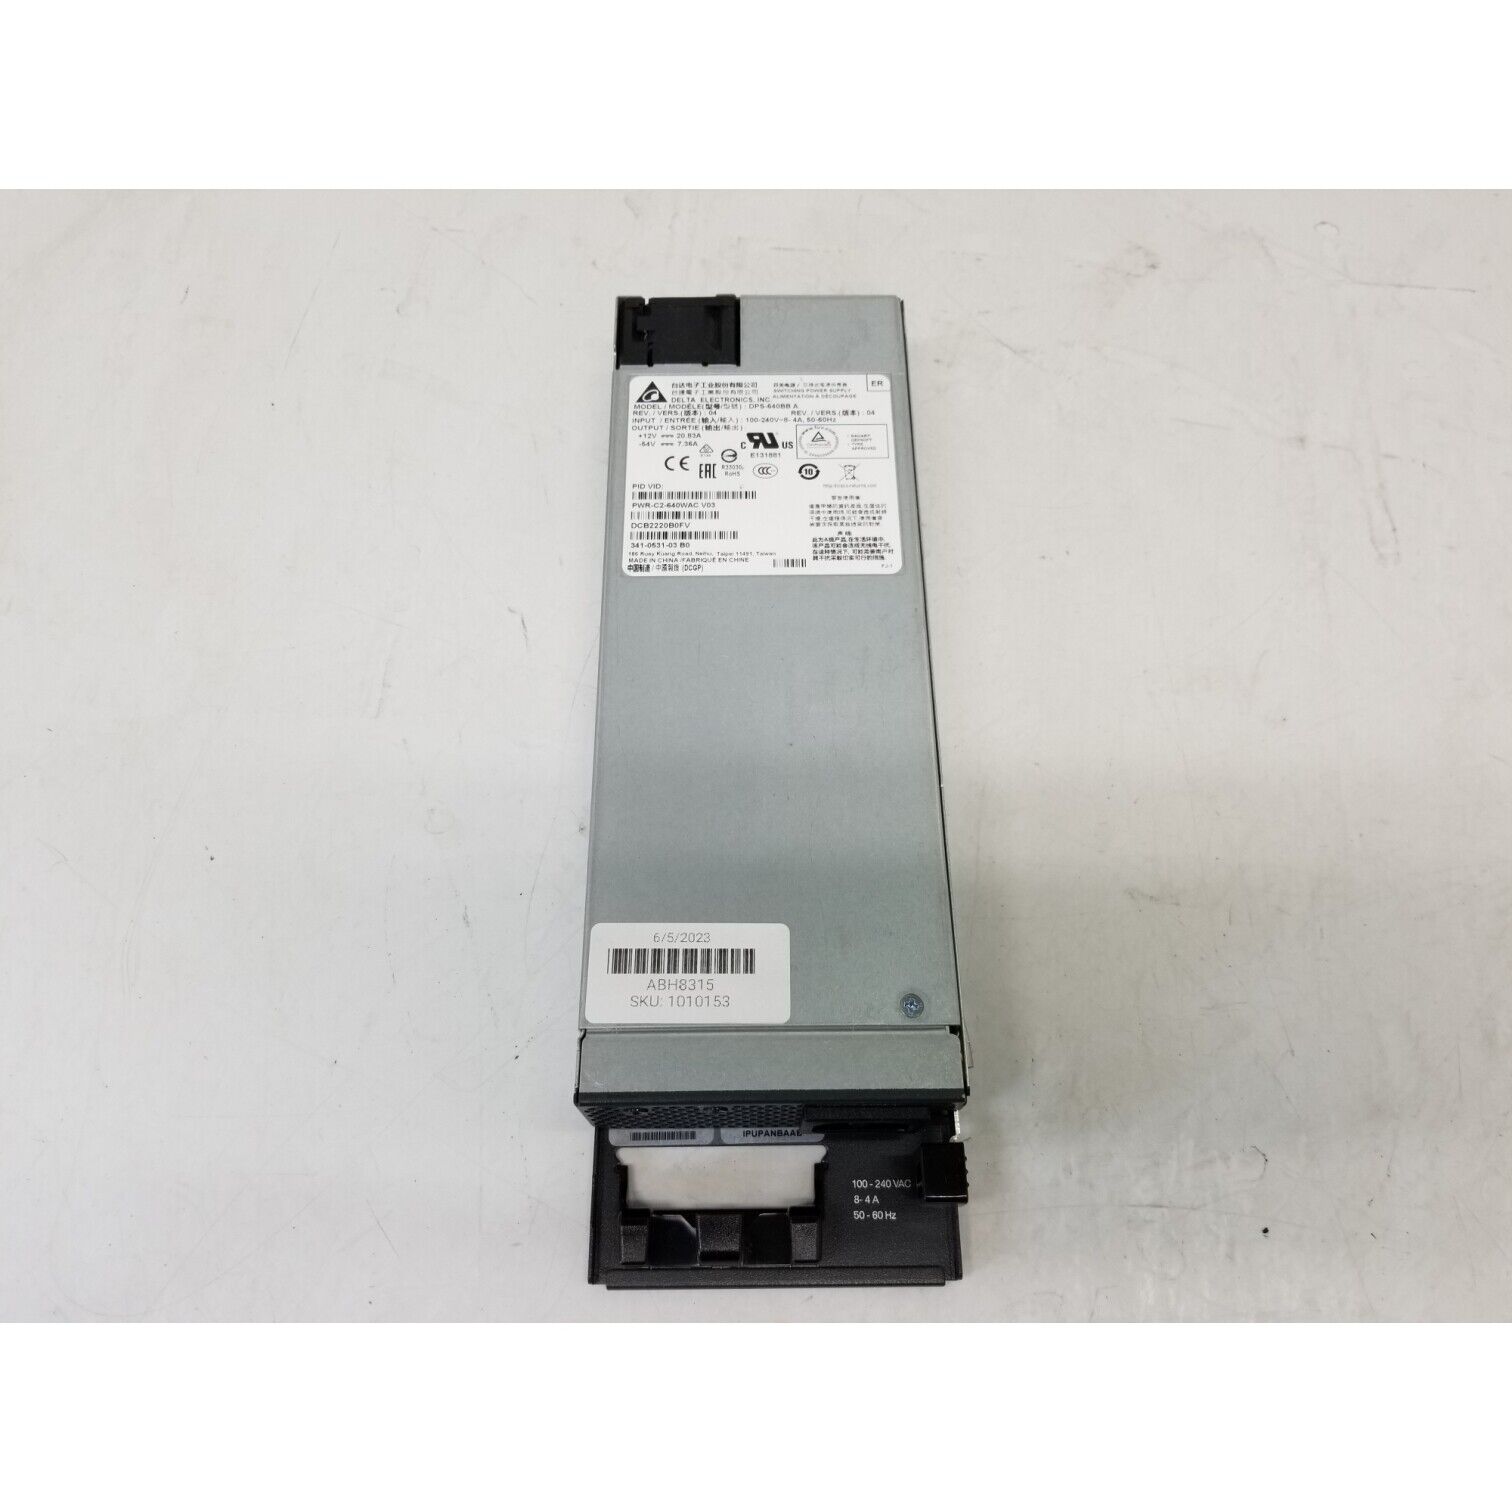 DELTA SWITCHING POWER SUPPLY DPS-640BB A